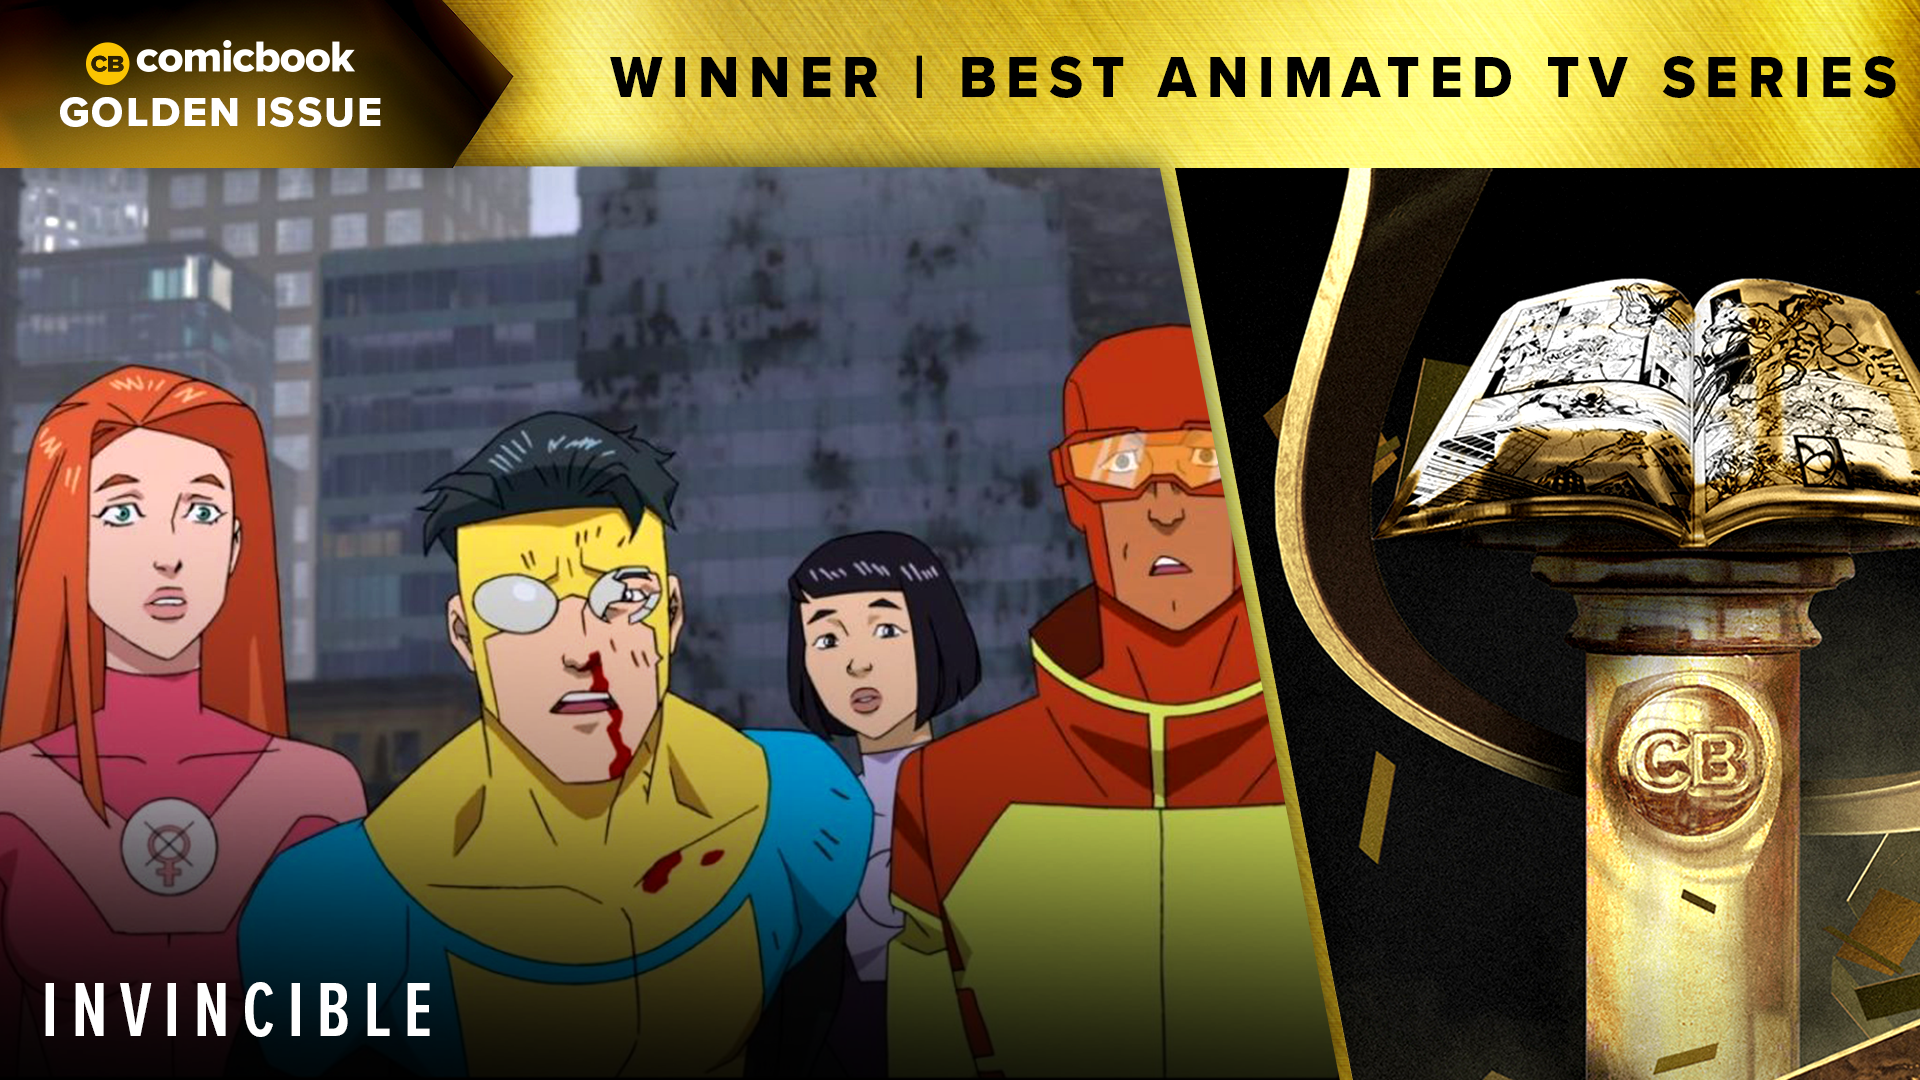 The 2021  Golden Issue Award for Best Animated TV Series